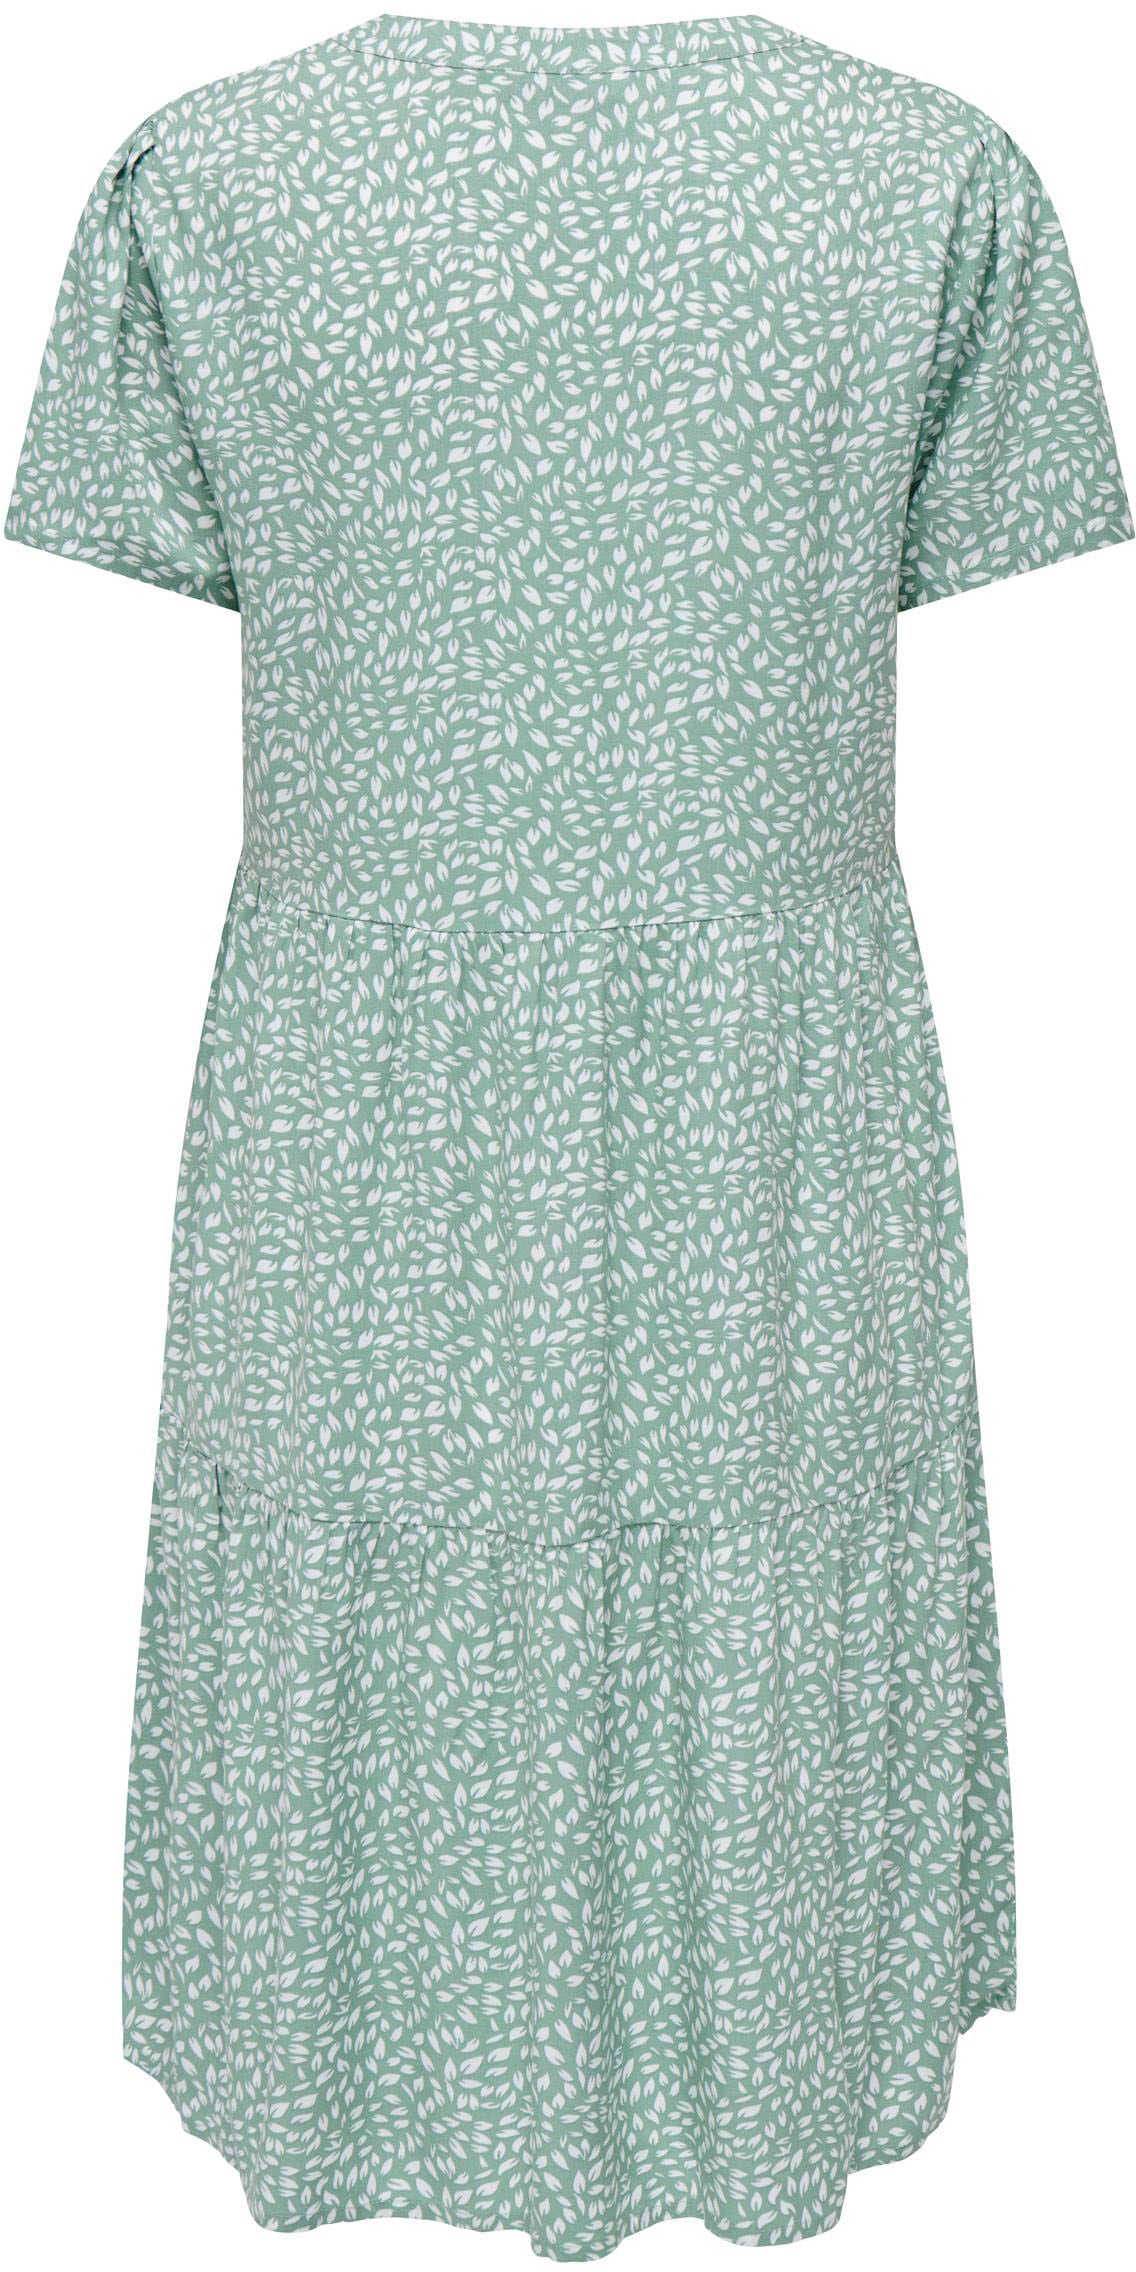 DRESS LIFE »ONLZALLY PTM« NOOS Sommerkleid S/S bei ♕ THEA ONLY